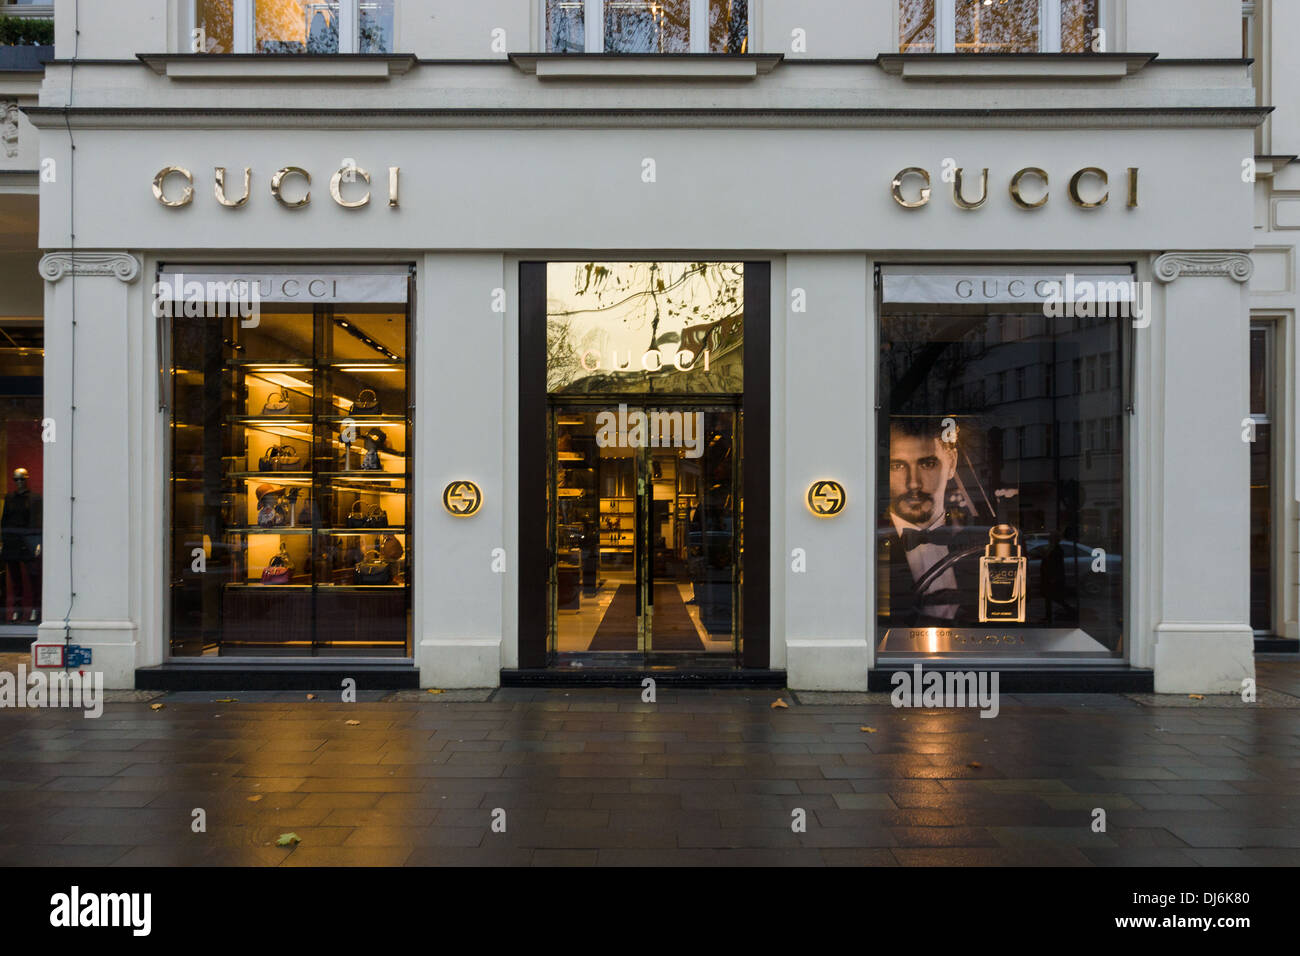 Boutique Gucci High Resolution Stock Photography and Images - Alamy